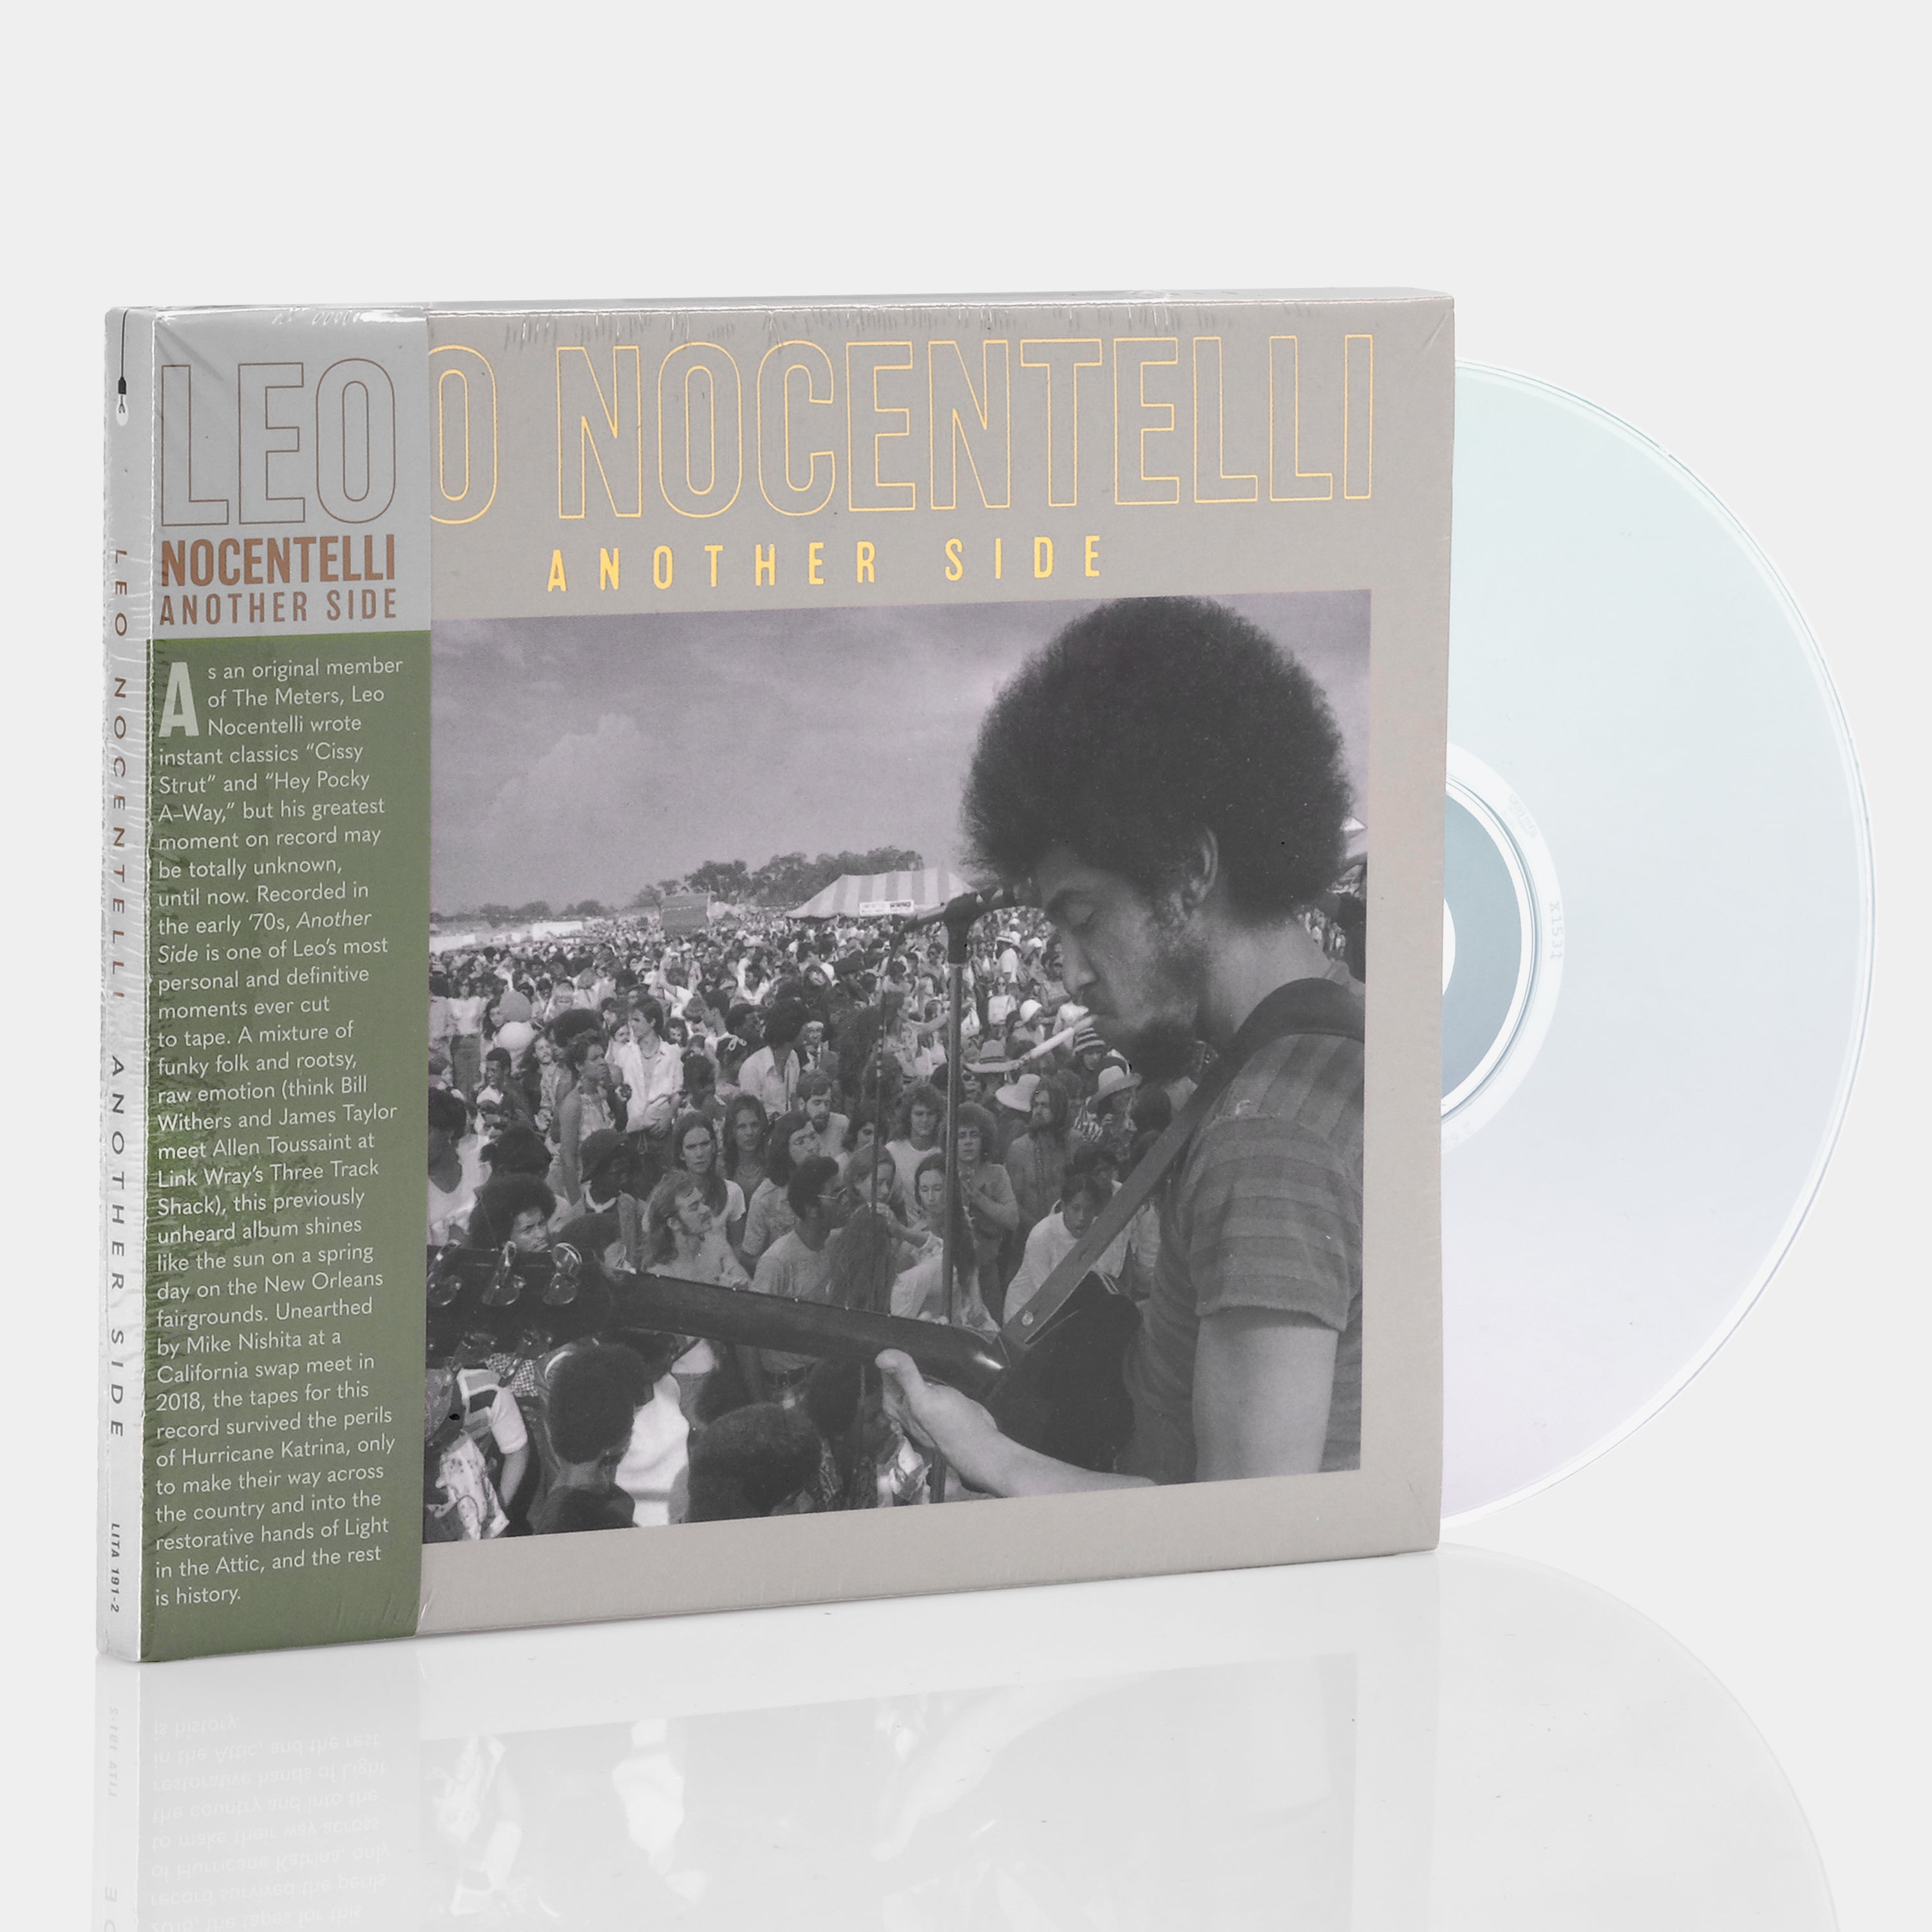 Leo Nocentelli - Another Side CD